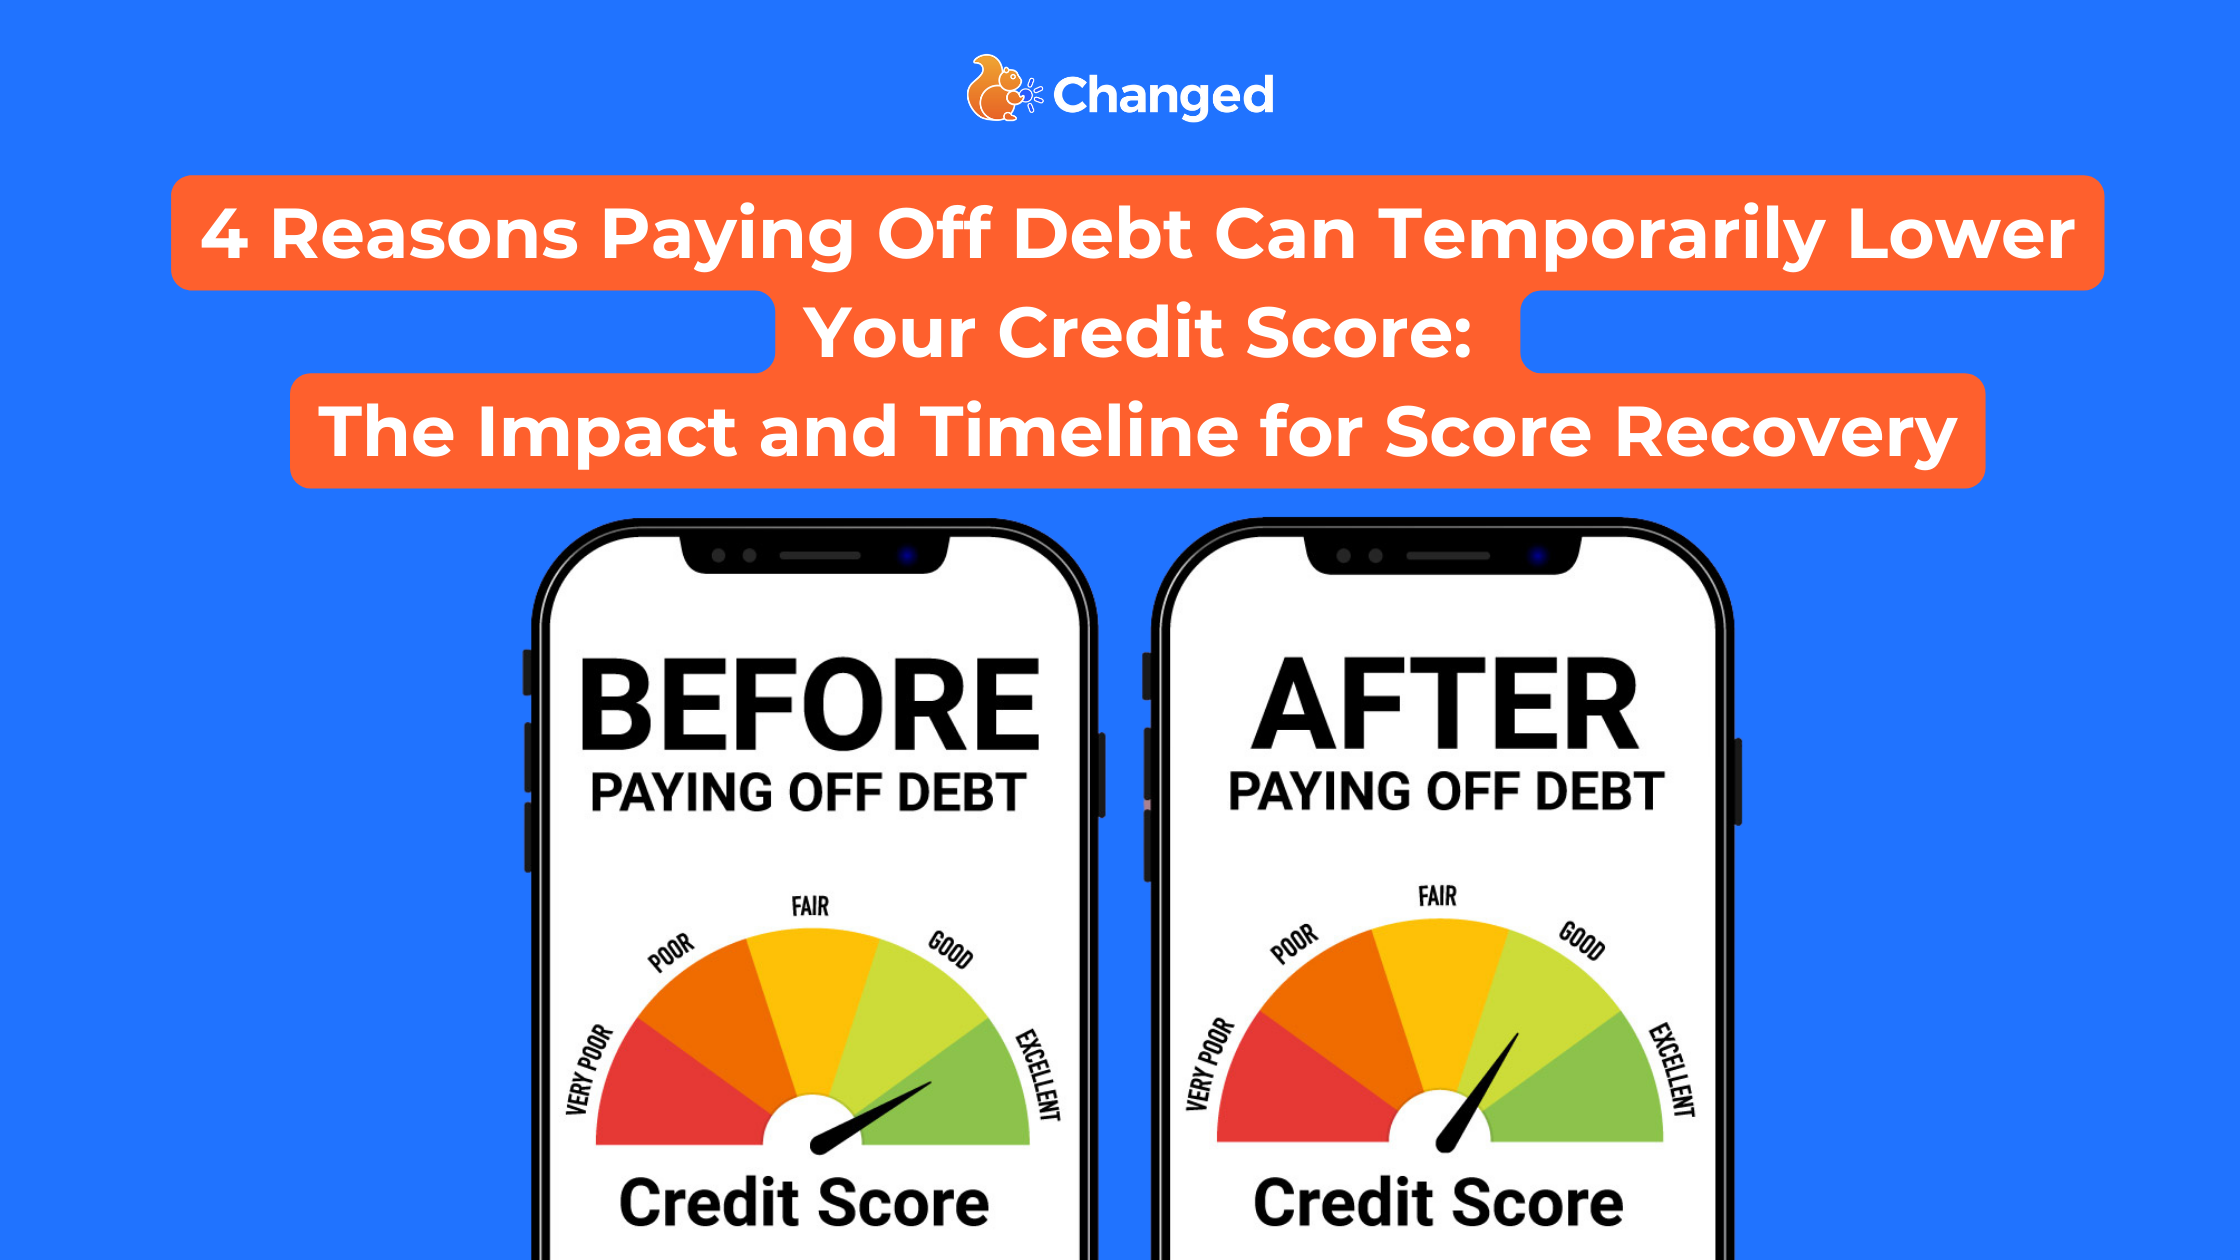 4 Reasons Paying Off Debt Can  Lower Your Credit Score: The Impact and Timeline for Score Recovery